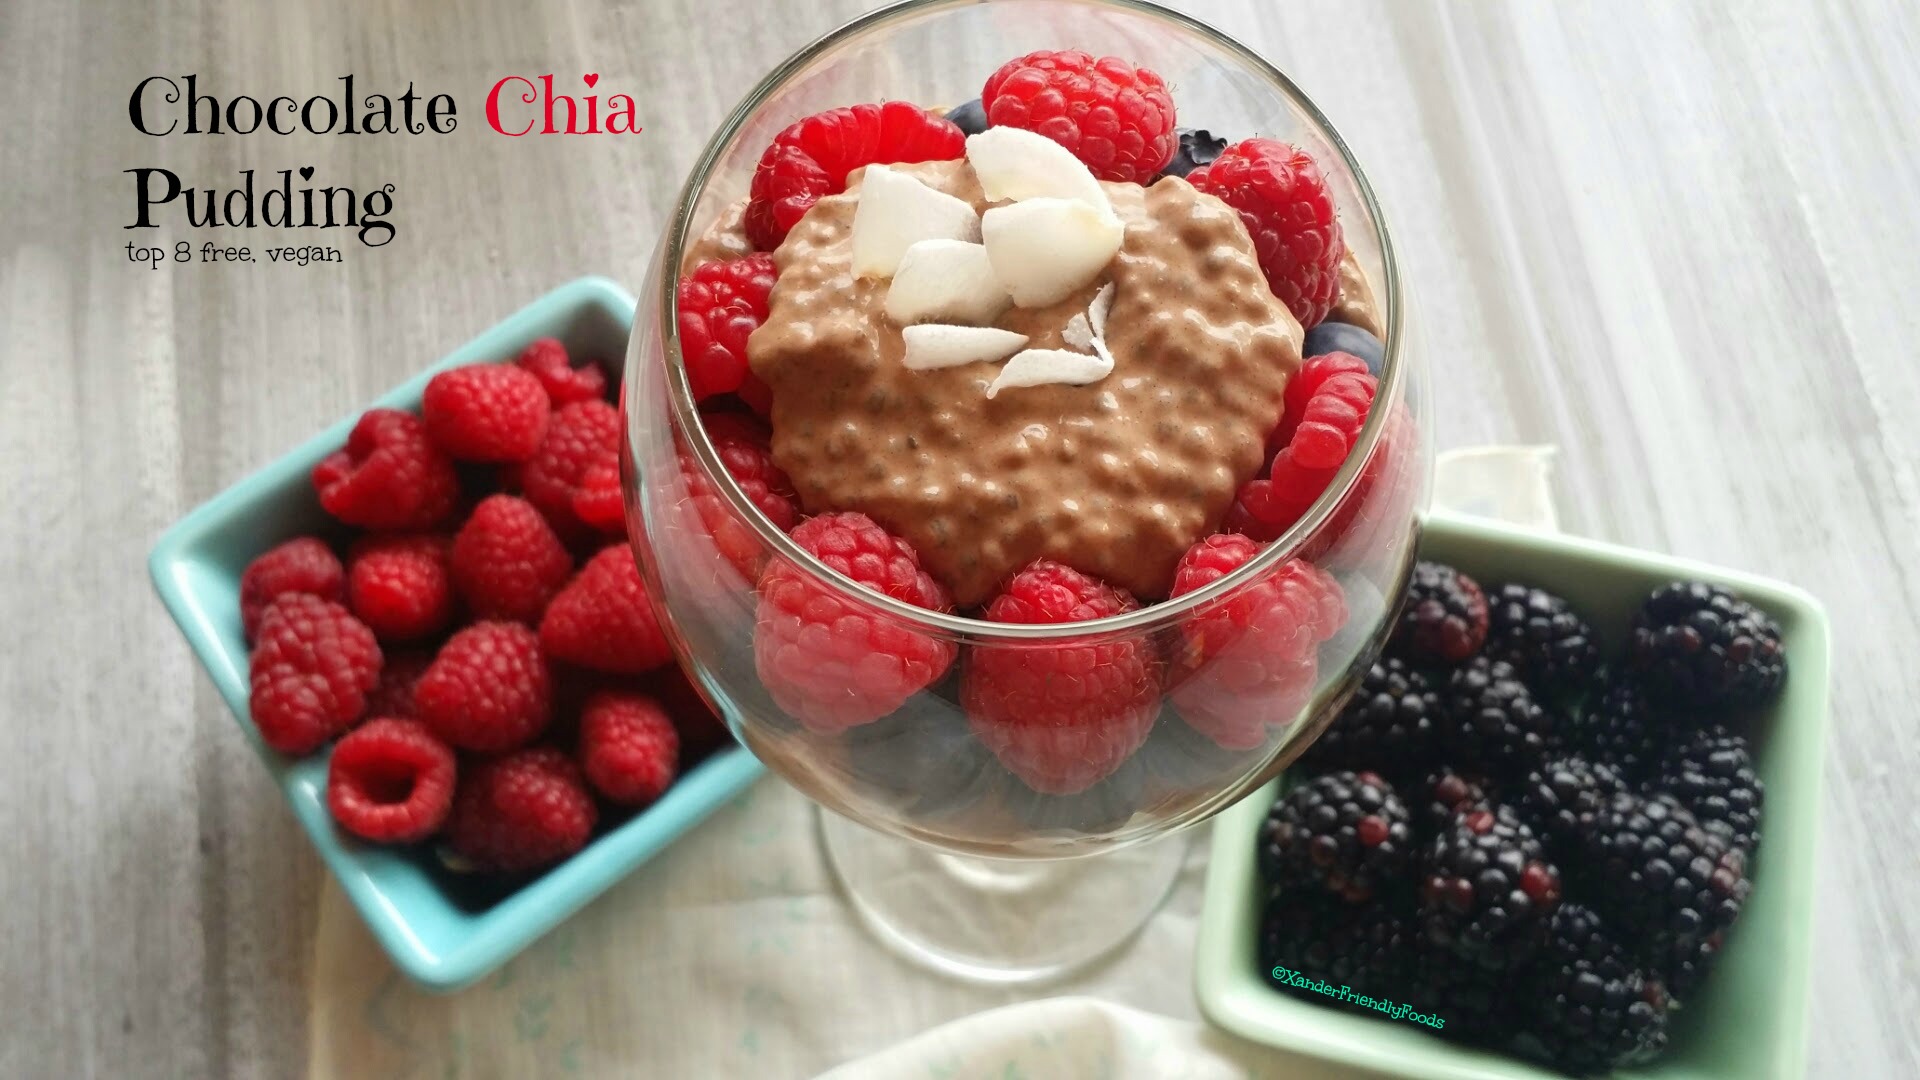 Chocolate chia pudding is a perfectly easy, healthy dessert that everyone will love. Just top with your favorite berries. 